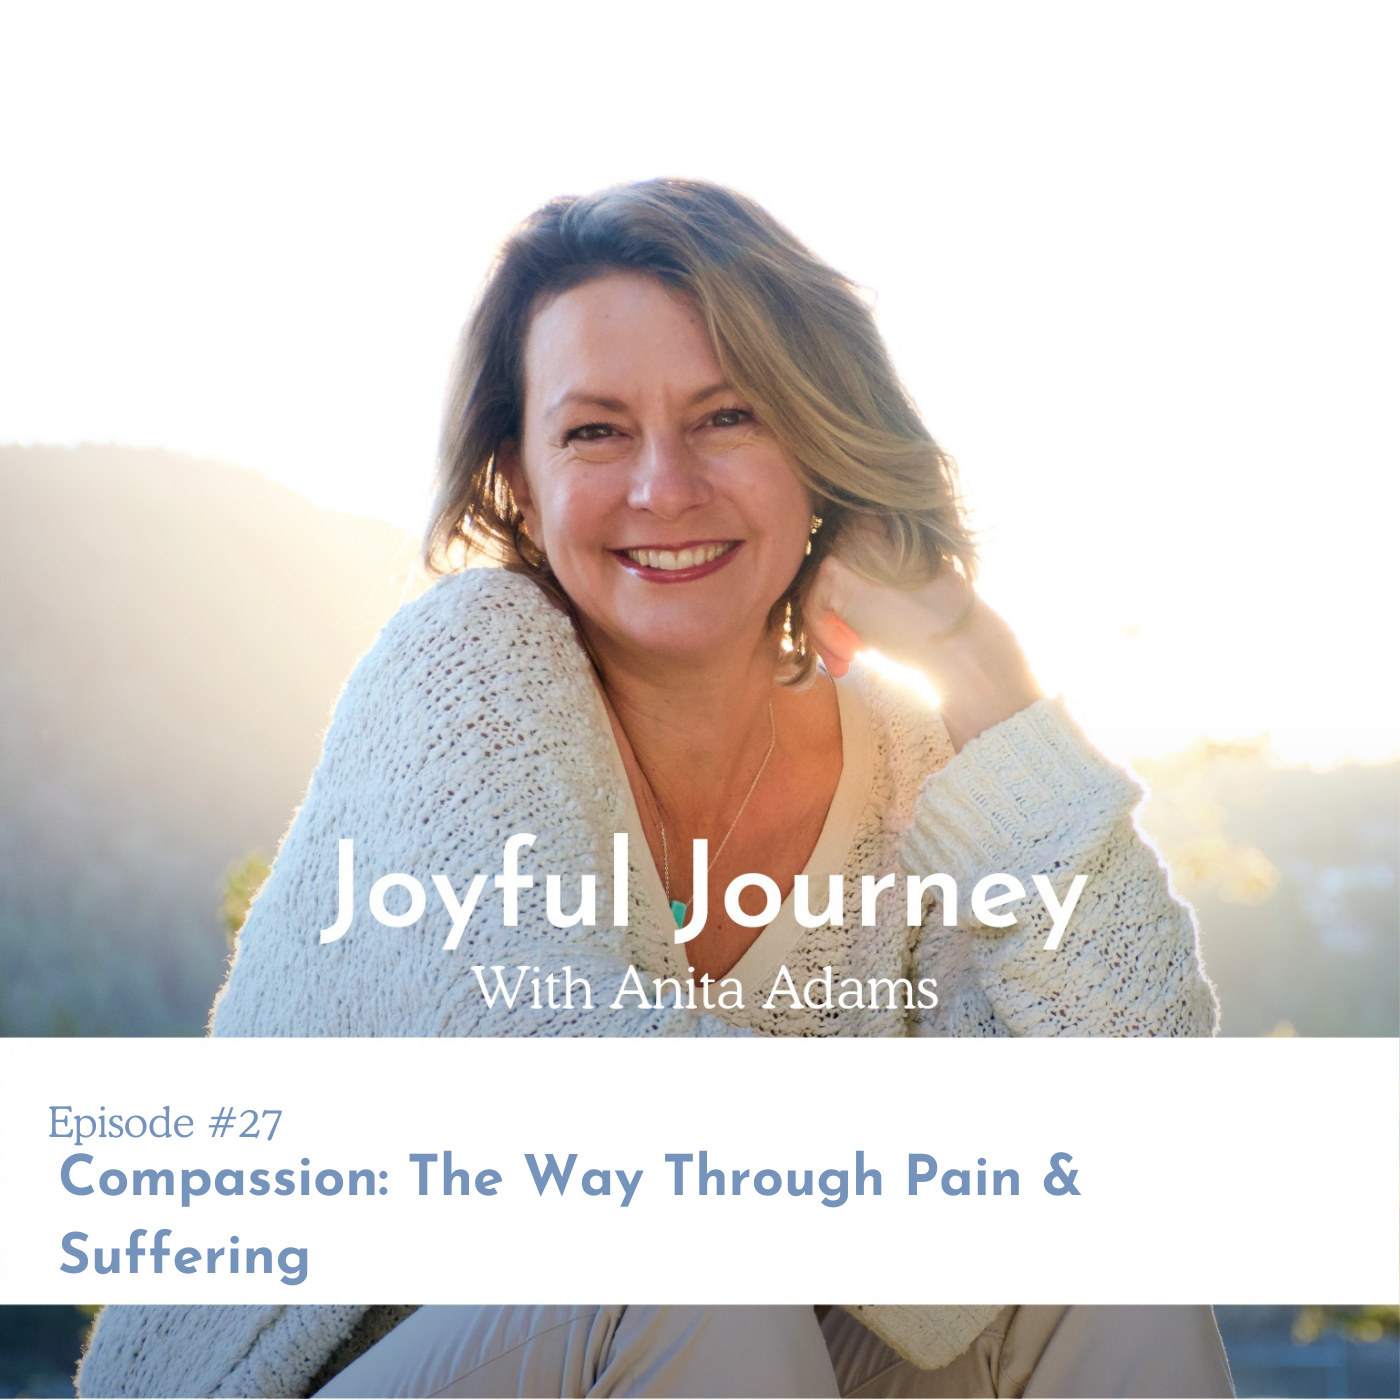 Compassion: The Way Through Pain & Suffering